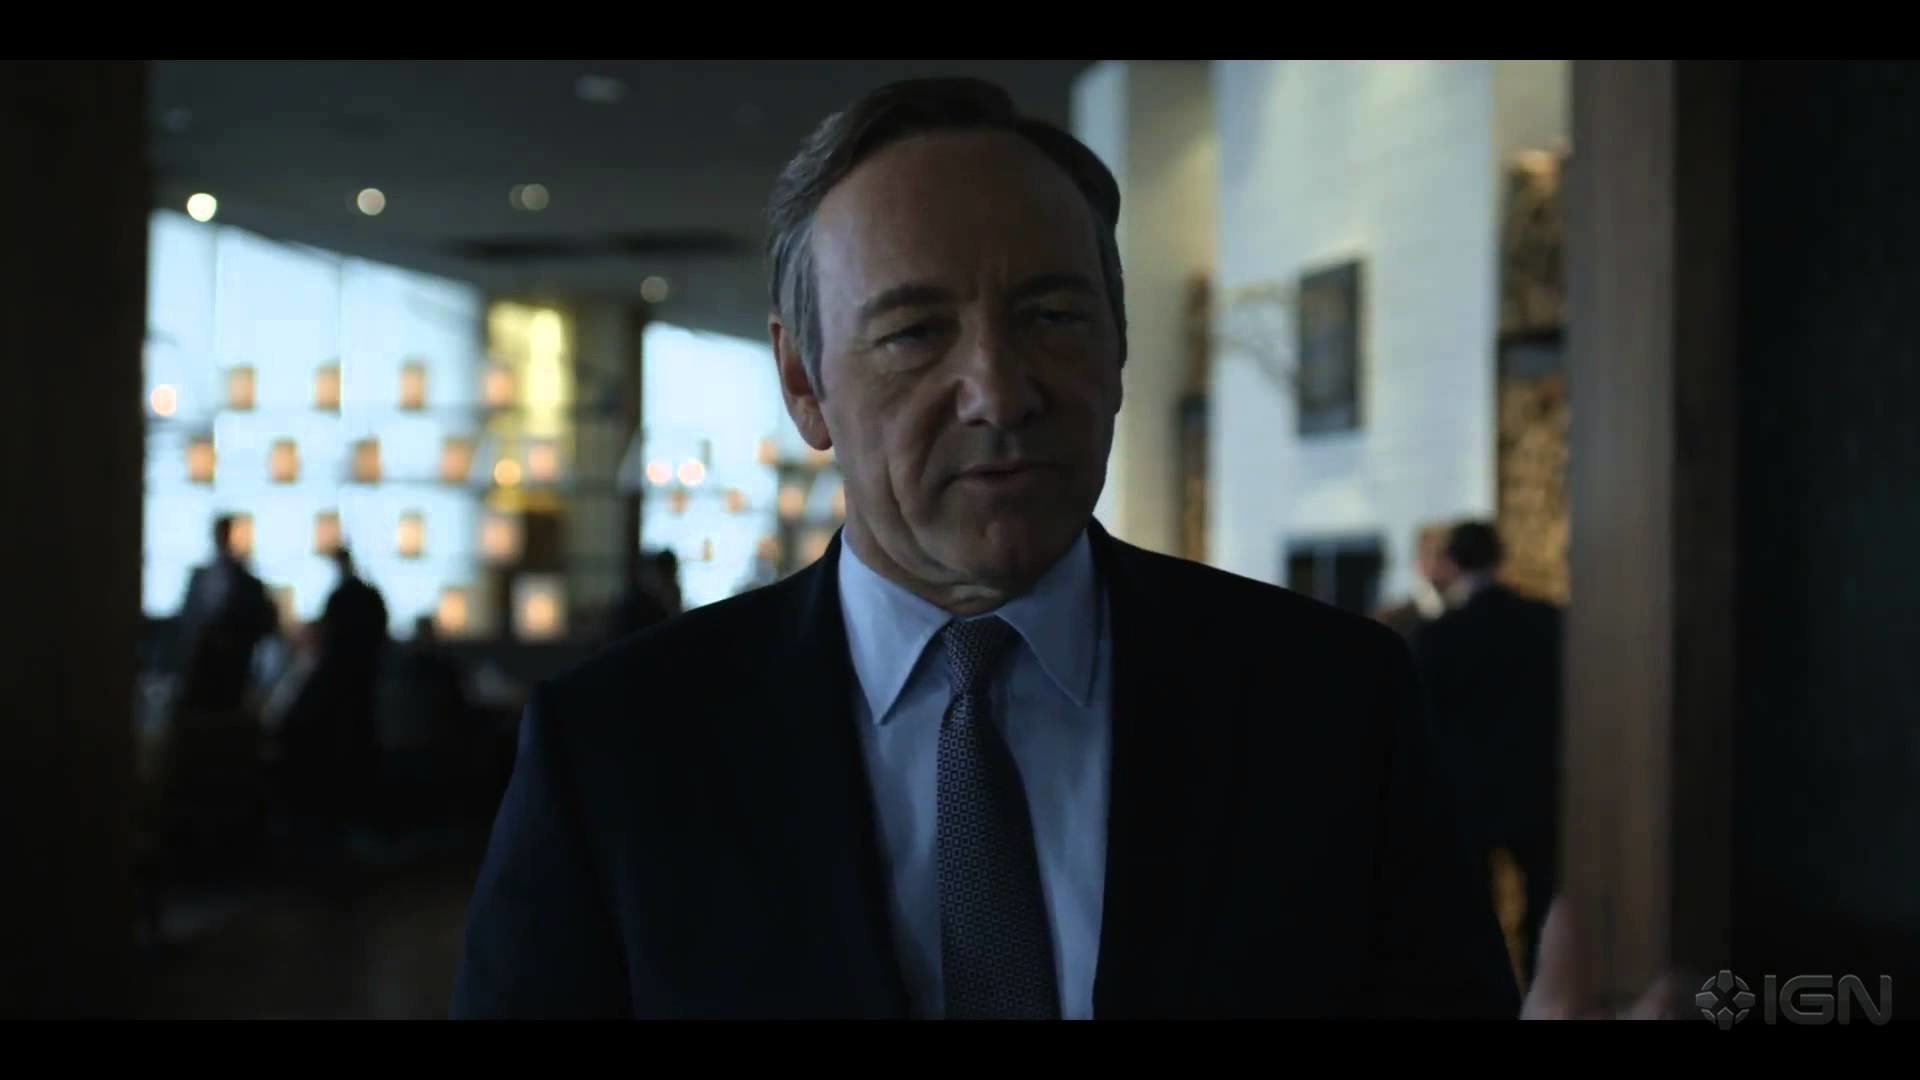 1920x1080 House of Cards Supercut: The Best of Kevin Spacey's Frank Underwood -  YouTube